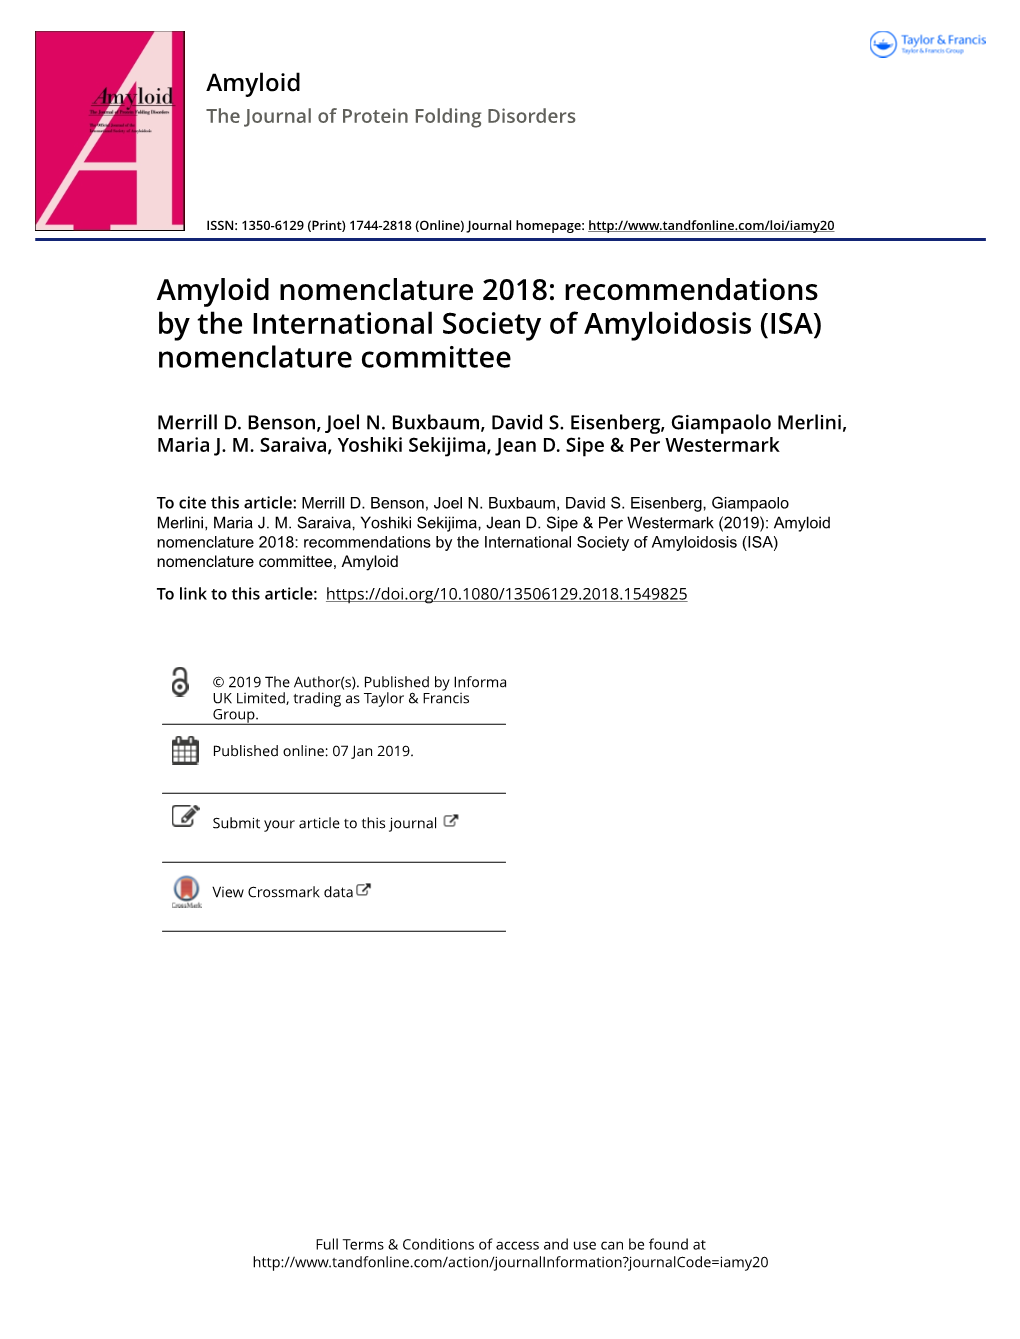 Amyloid Nomenclature 2018: Recommendations by the International Society of Amyloidosis (ISA) Nomenclature Committee